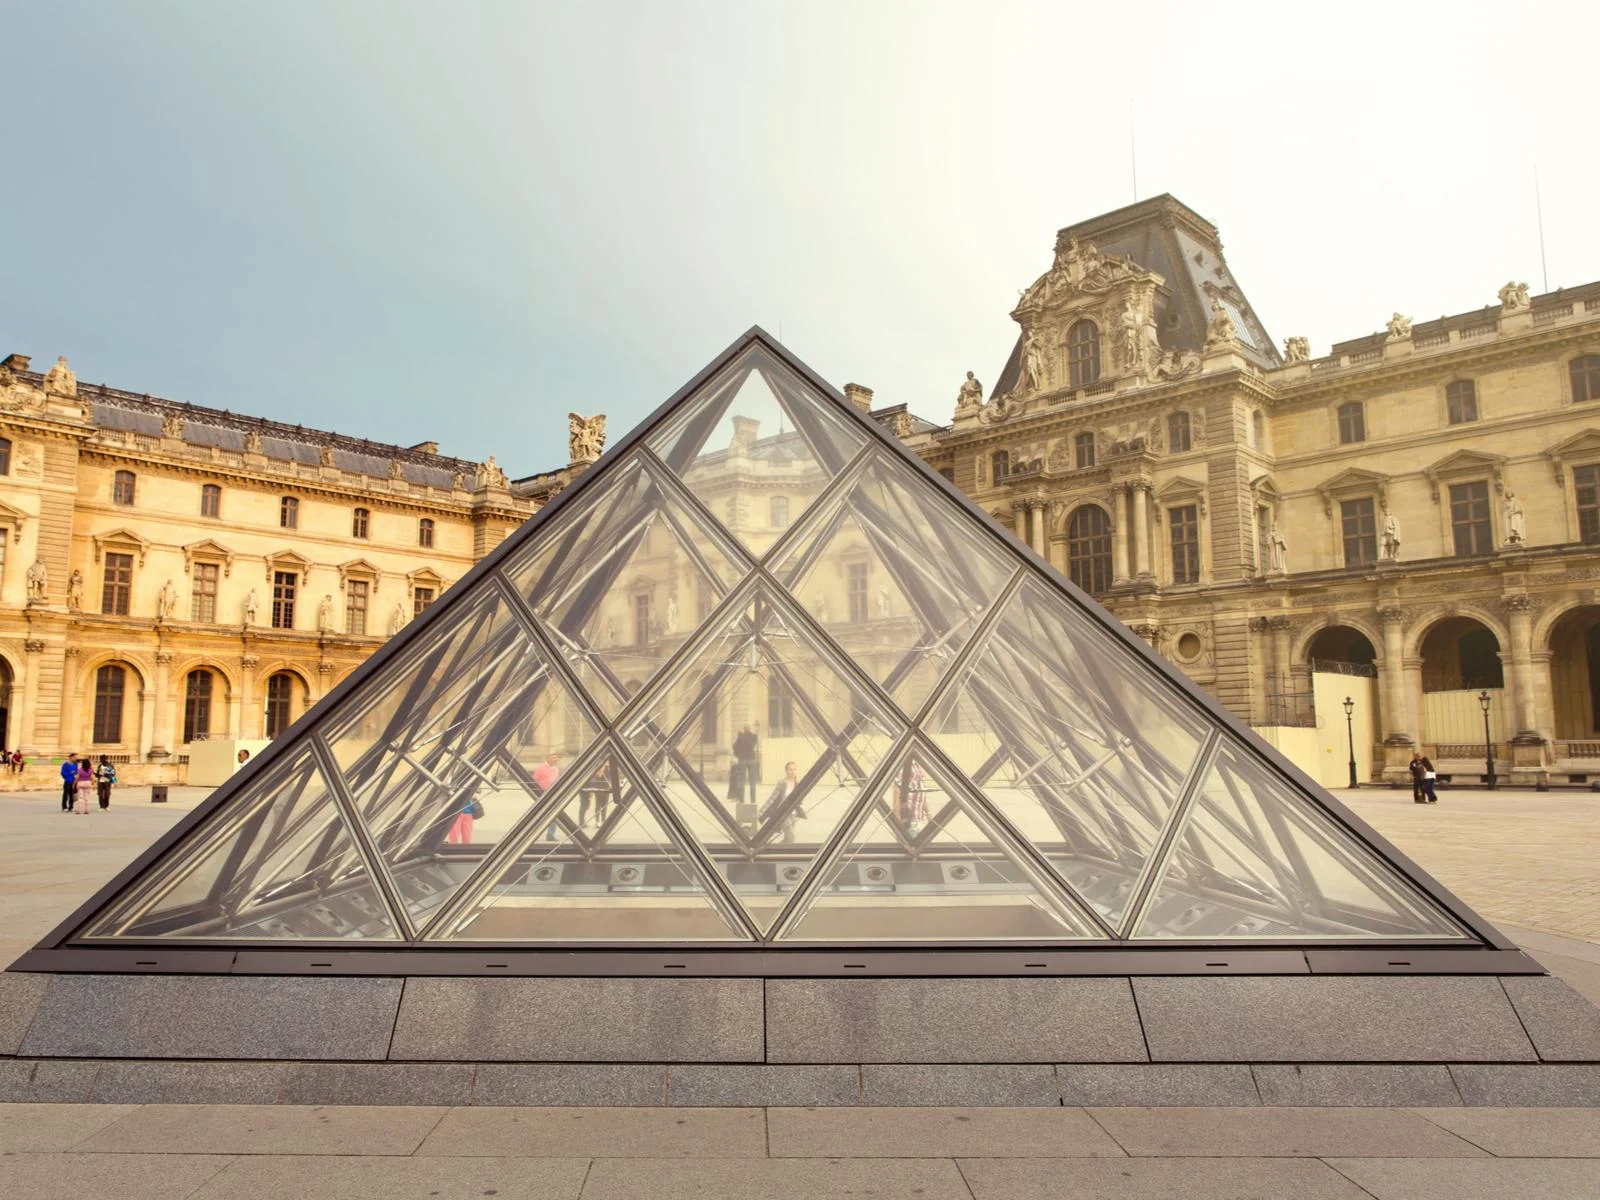 The Louvre pictured with its glass roof in the shape of a triangle on a cloudy day